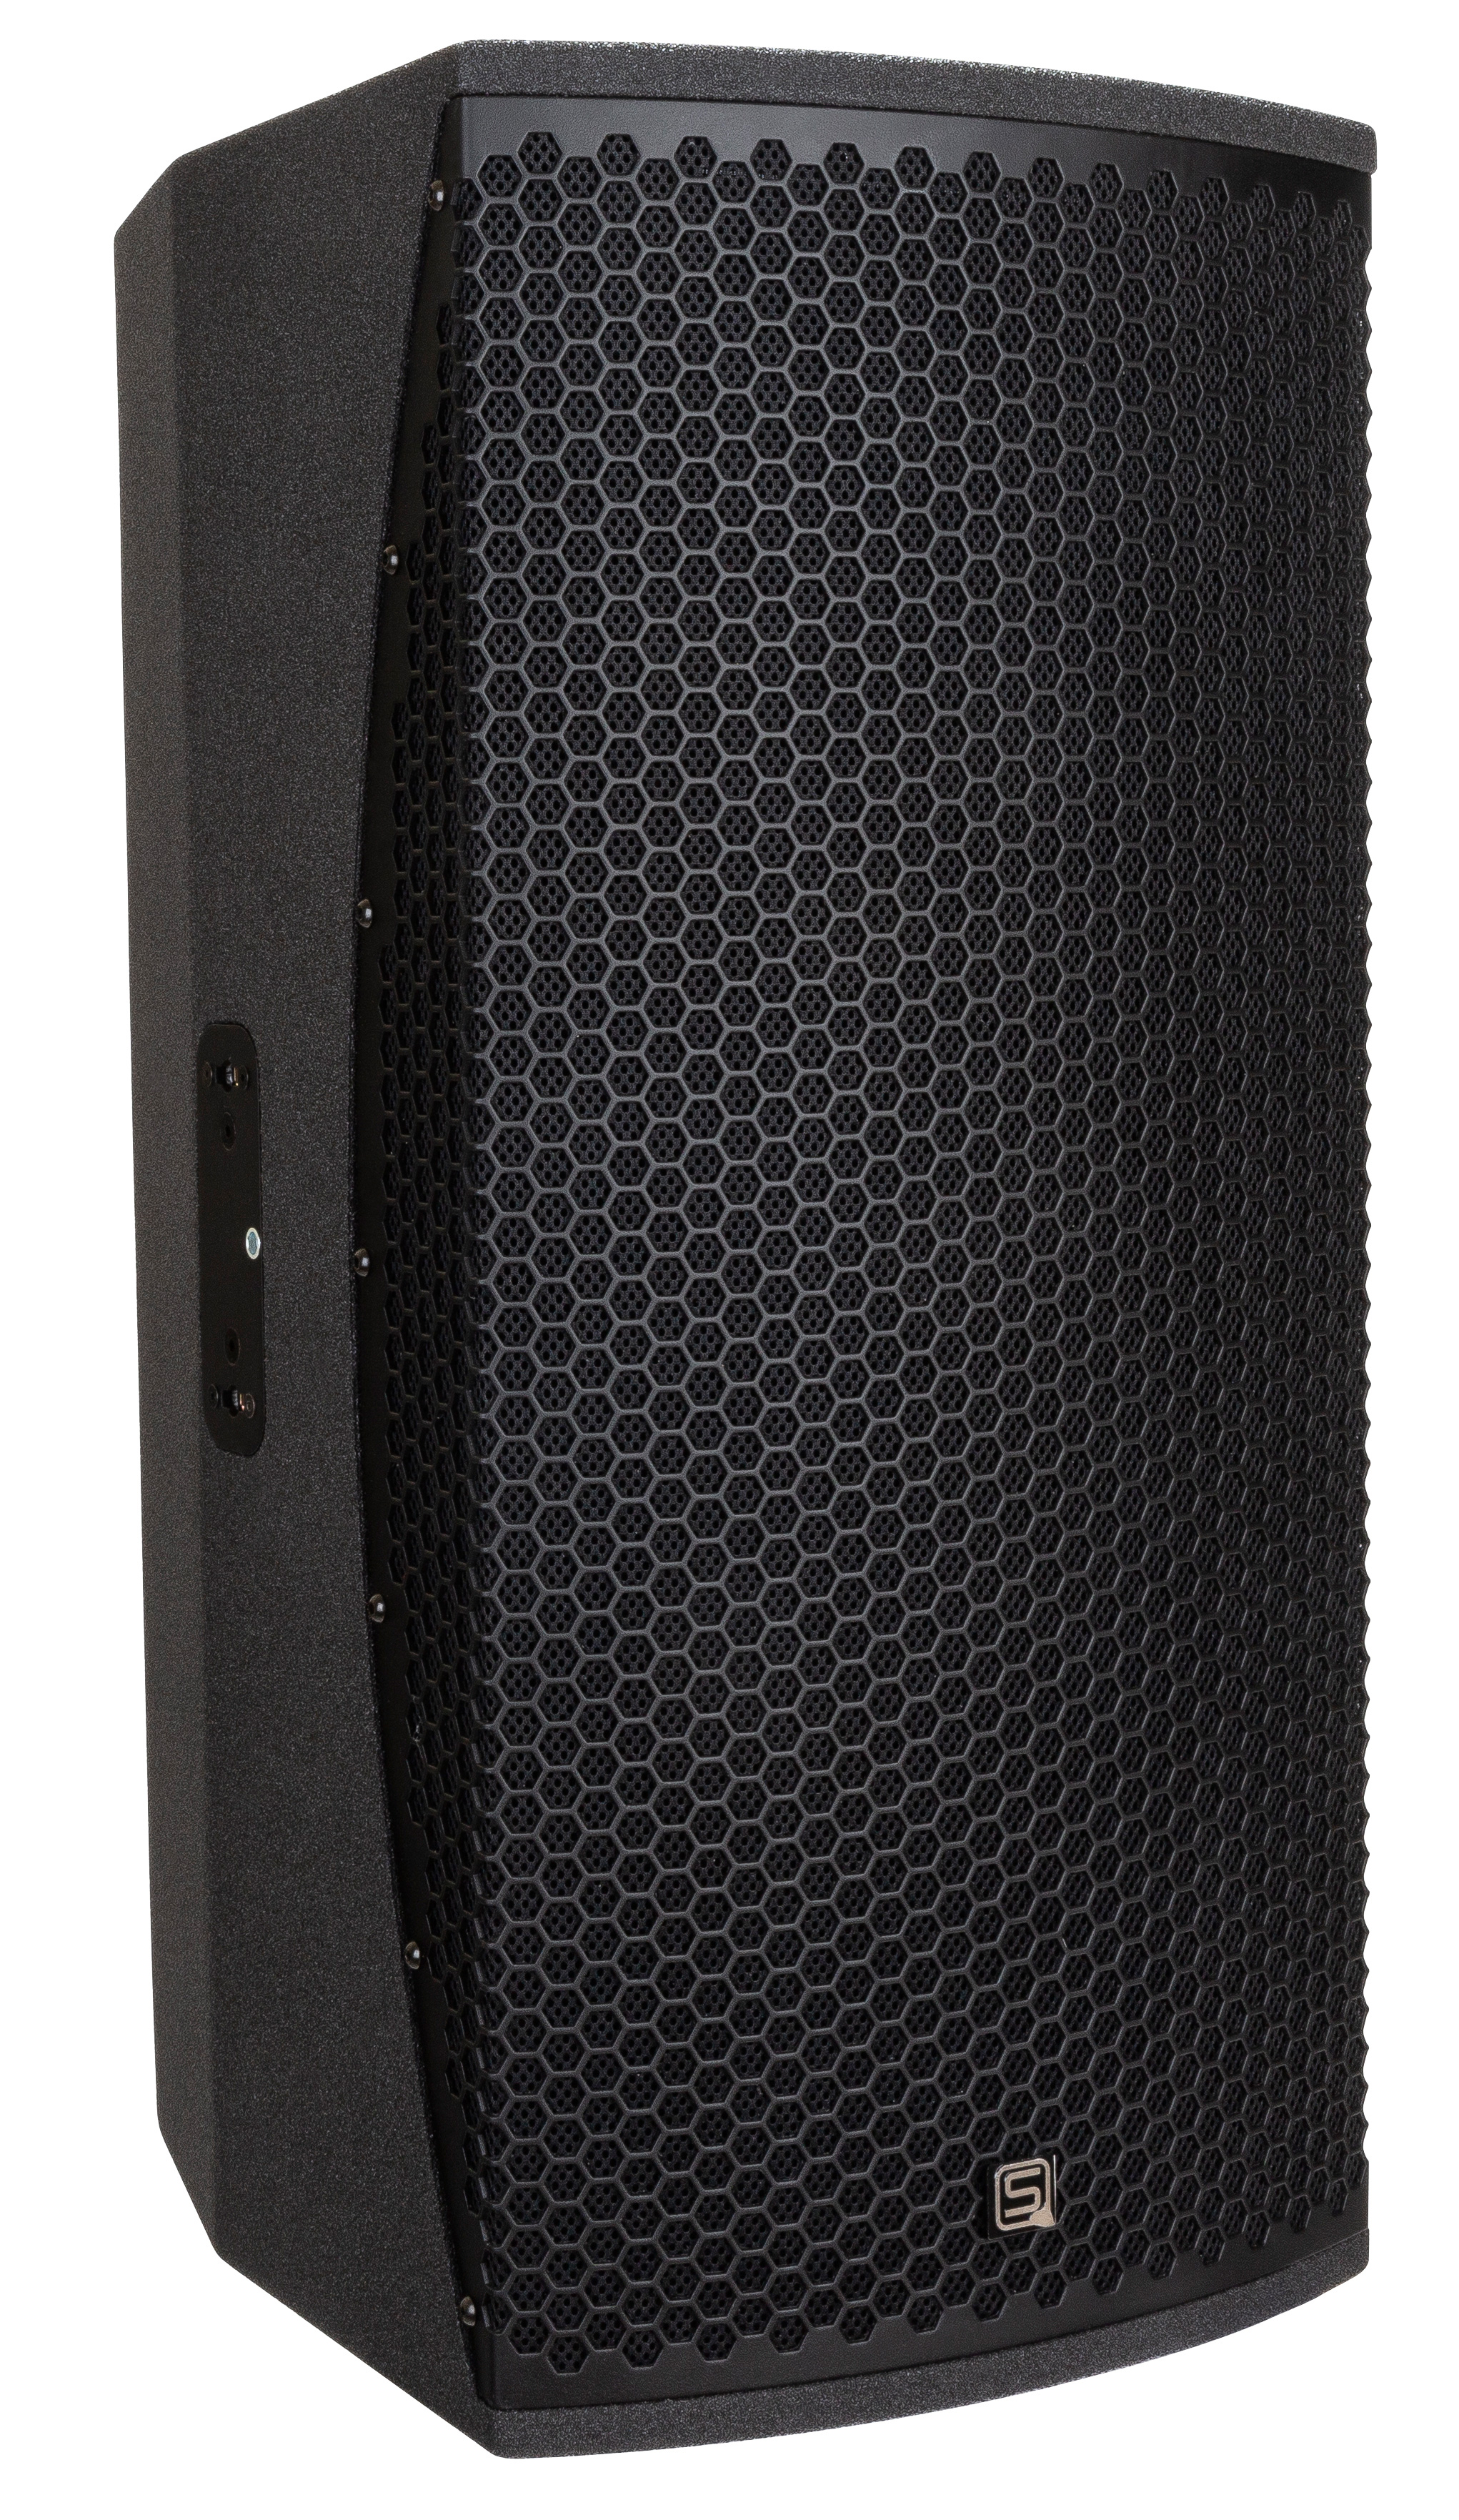 Premium class DSP-processed active speaker cabinet with 2x 10" LF + 1.4" MID/HF driver, designed for a wide range of professional high SPL applications